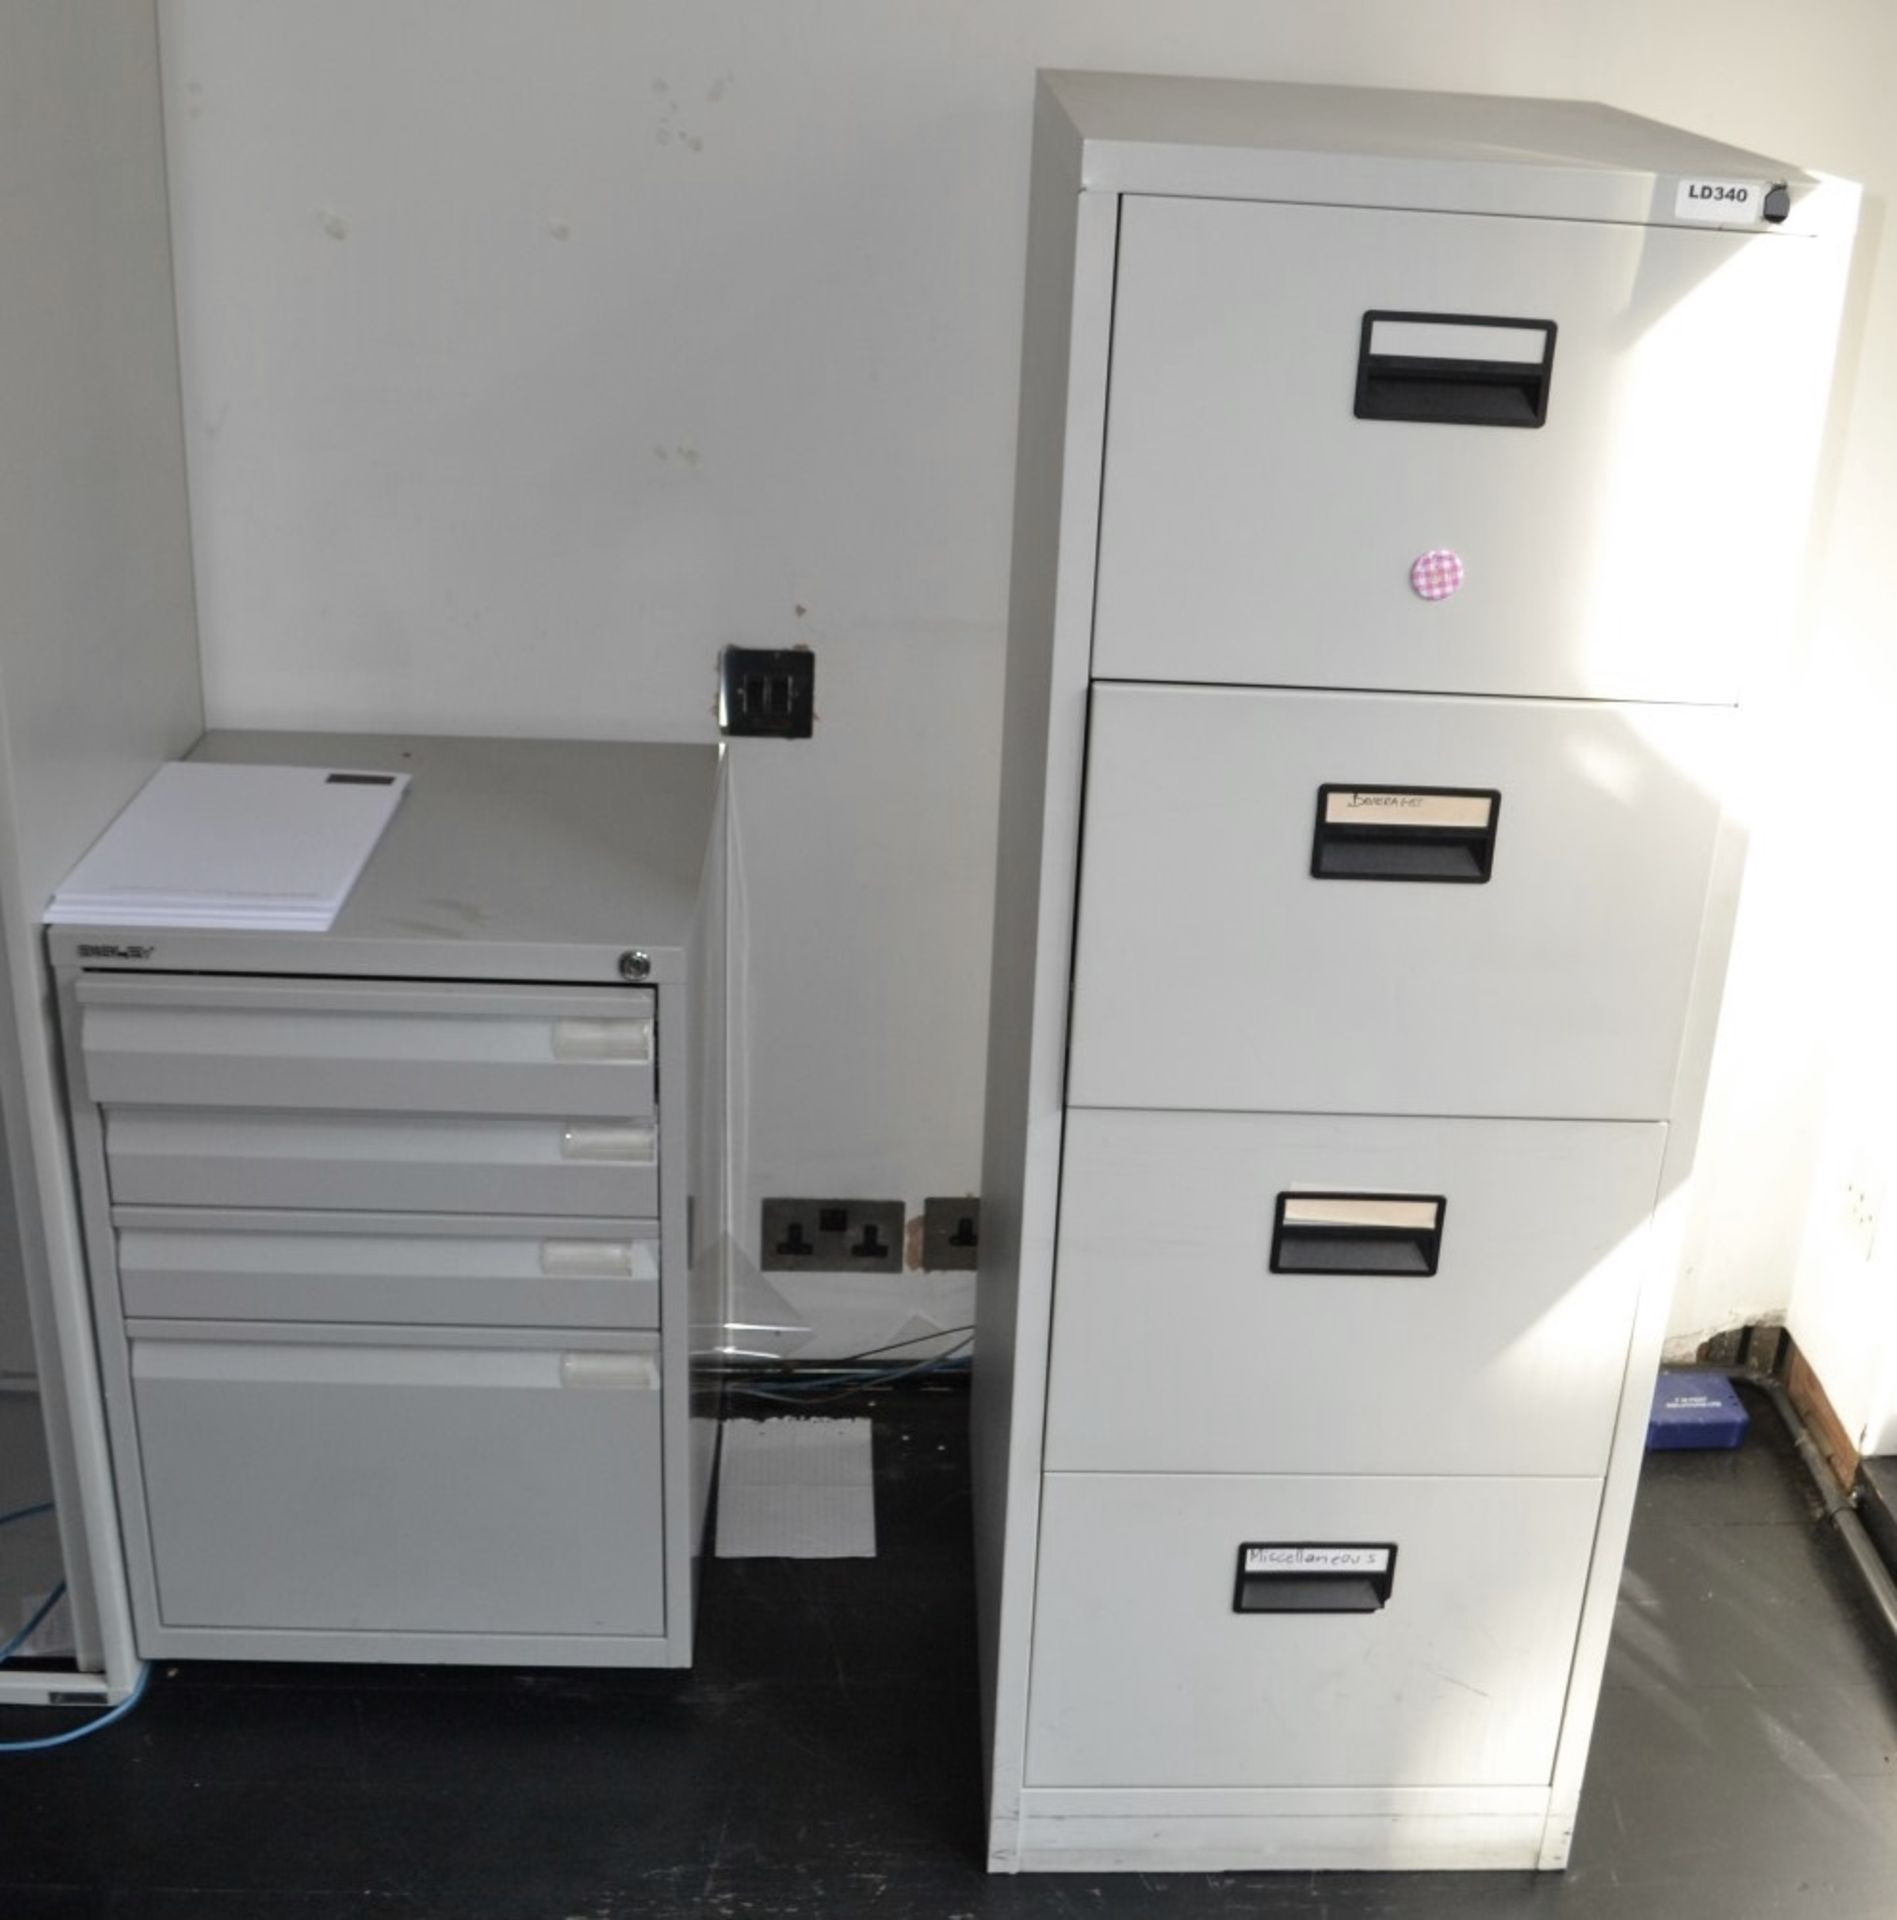 4 x Assorted Metal Office Filing Cabinets - Dimensions: W47 x 47 x 73cm - CL392 - Ref LD340/LD342 4F